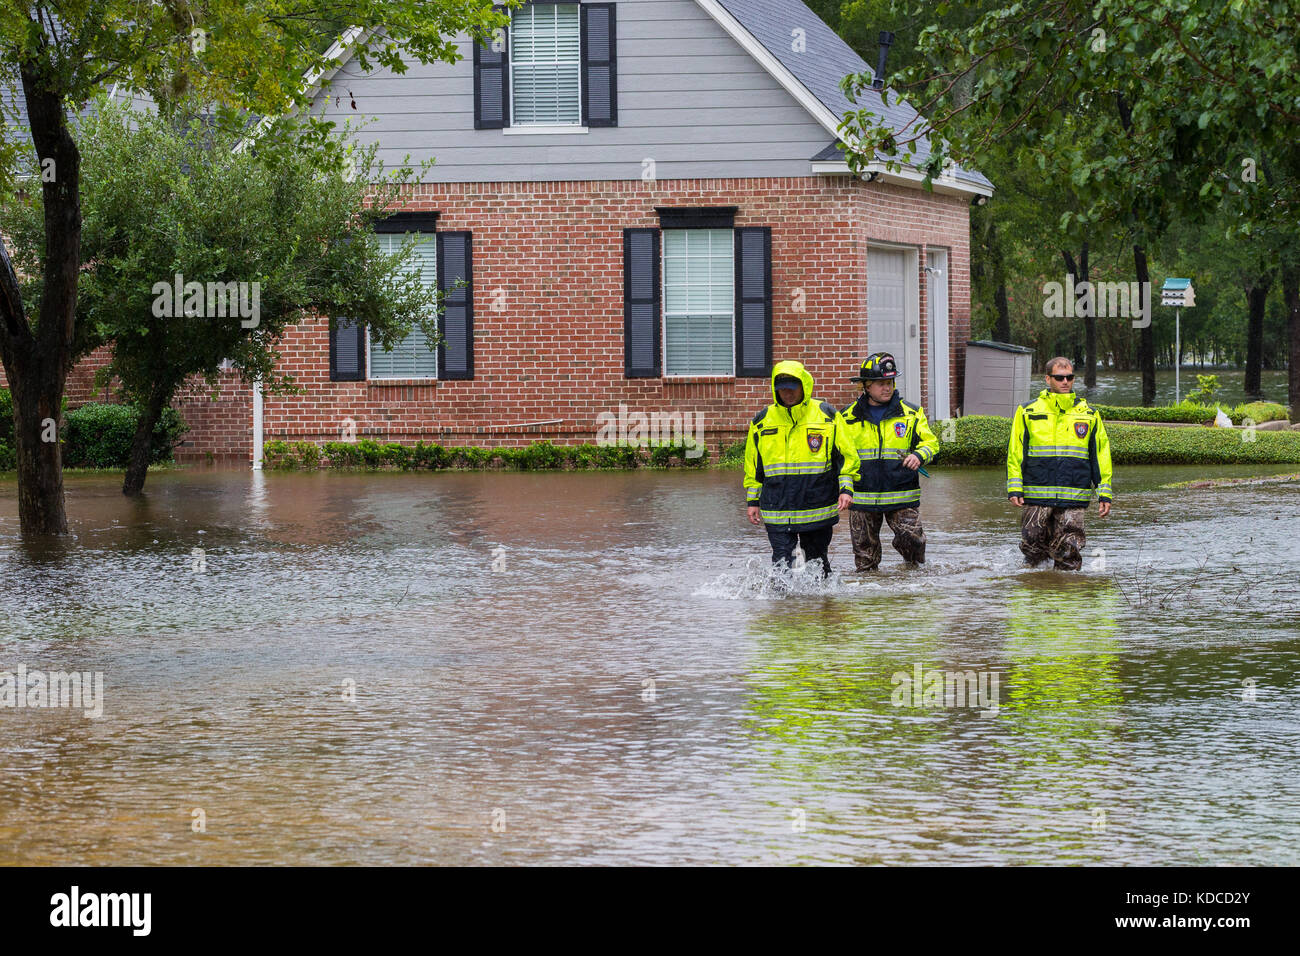 The first responders from Missouri City Fire Station 4 inspect flooded houses in Houston suburb. Emergency services respond to hurricane Harvey Stock Photo